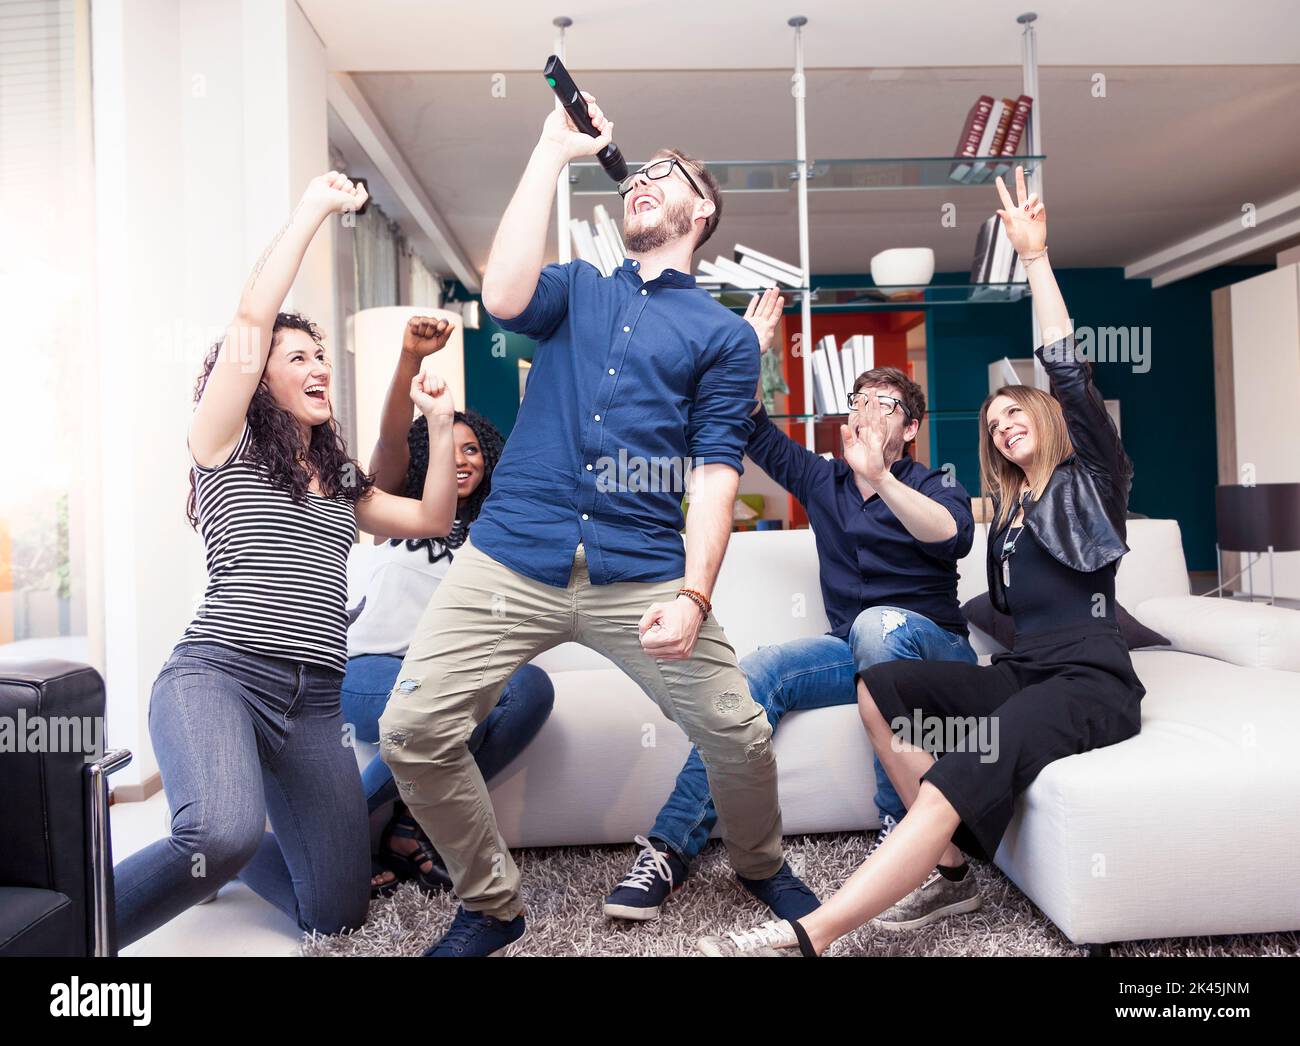 group of friends having fun at home singing a song together in new apartment Stock Photo